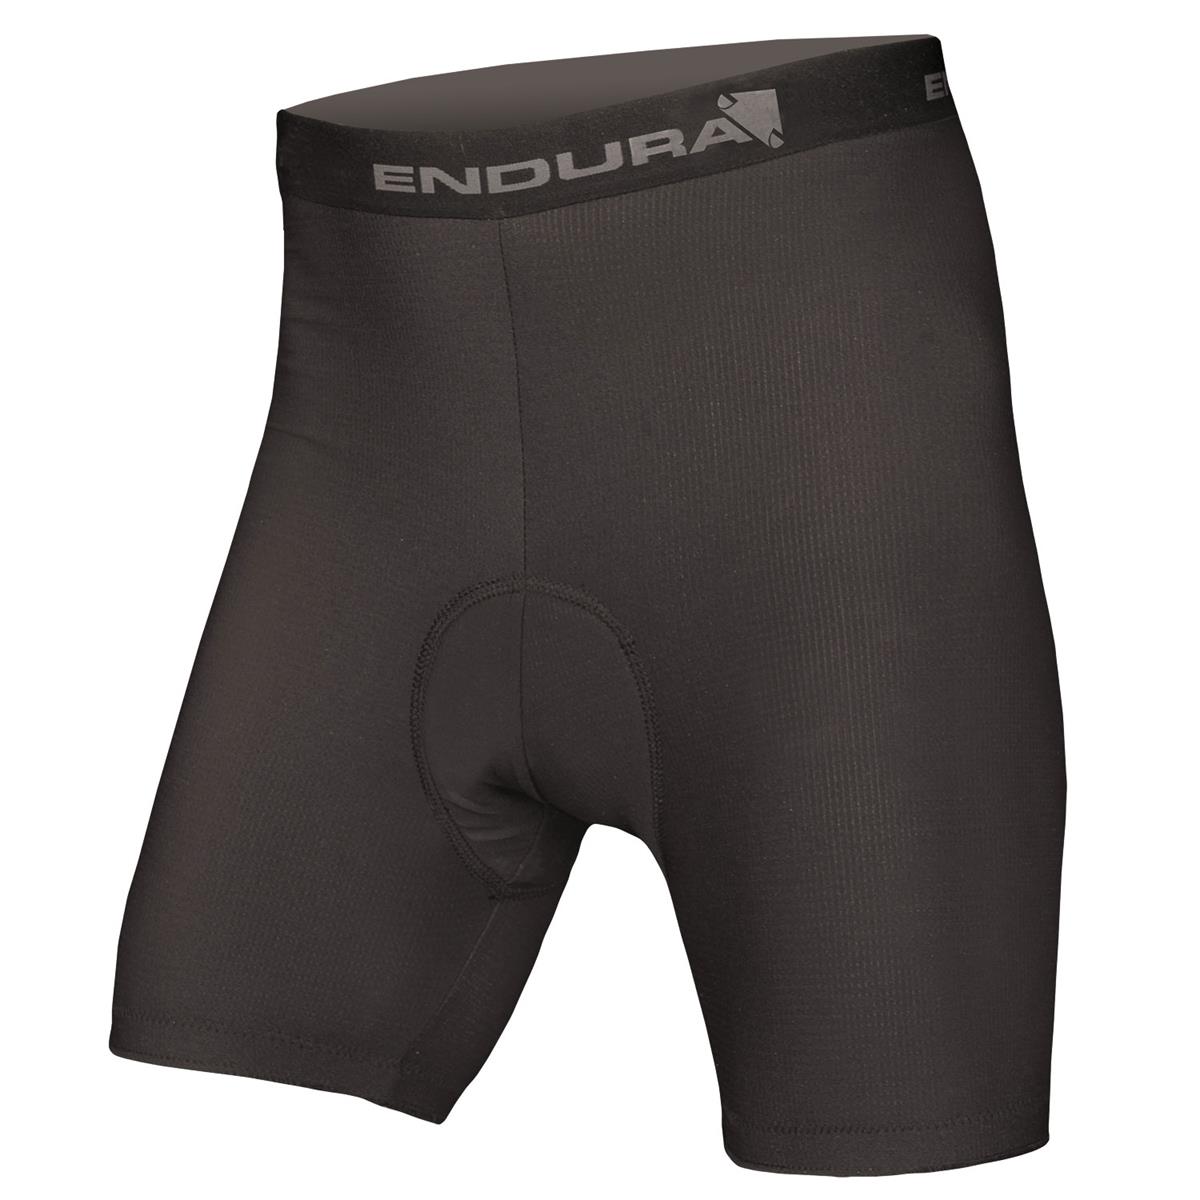 cycling shorts inner liner